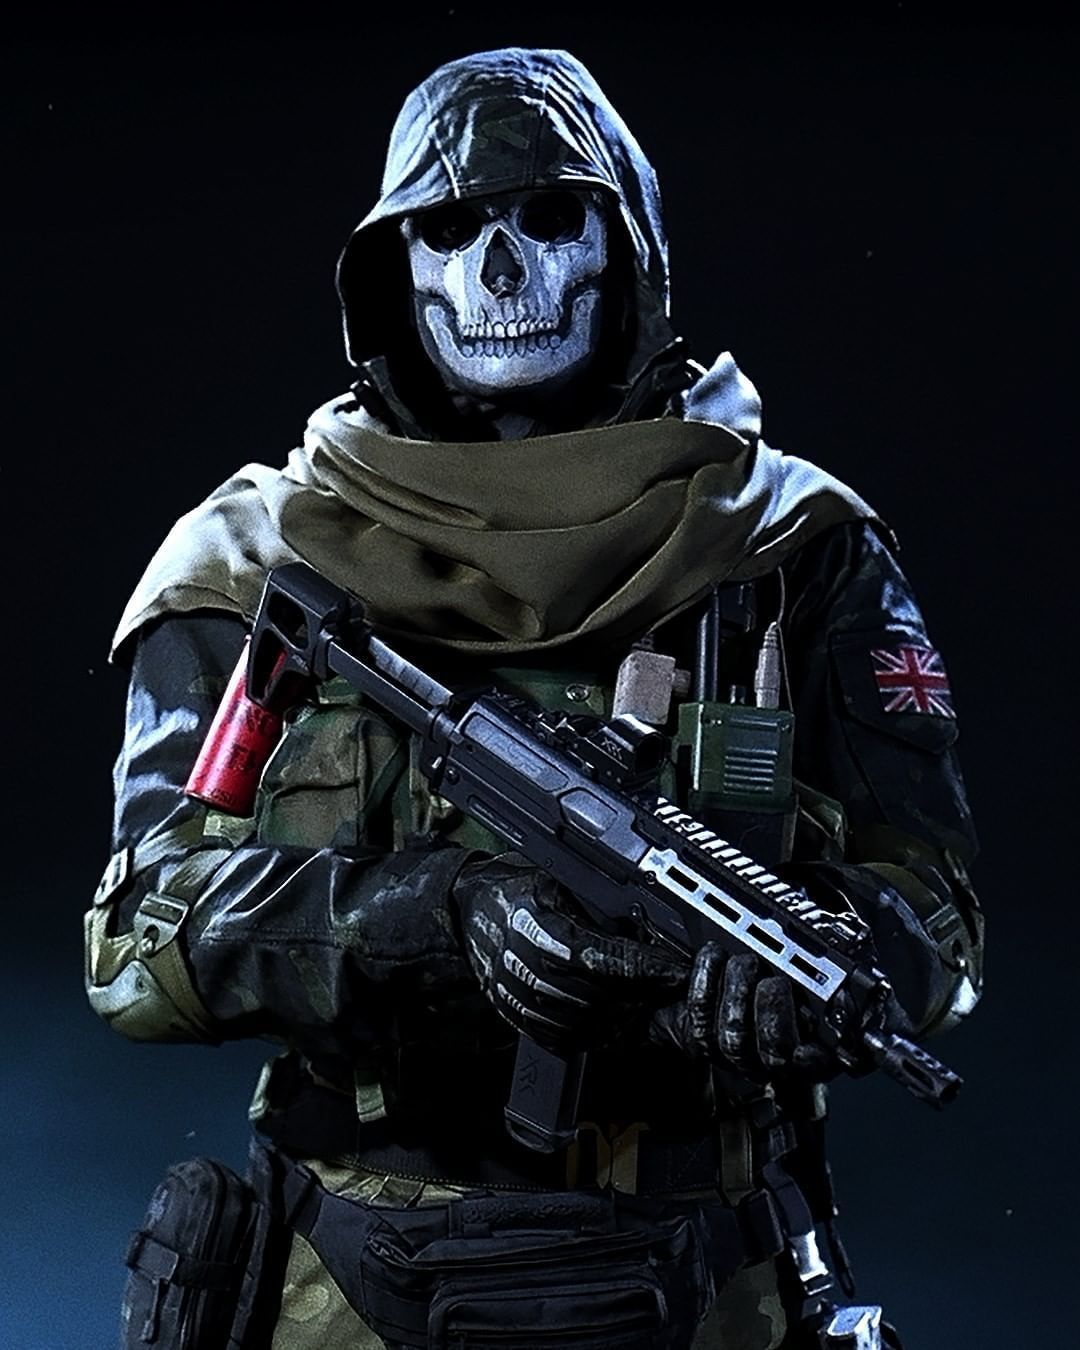 Call of Duty on Instagram: “A reckoning awaits. Purchase the Season 2 Battle Pass and grind to tier 100. Call of duty, Call of duty warfare, Call of duty ghosts